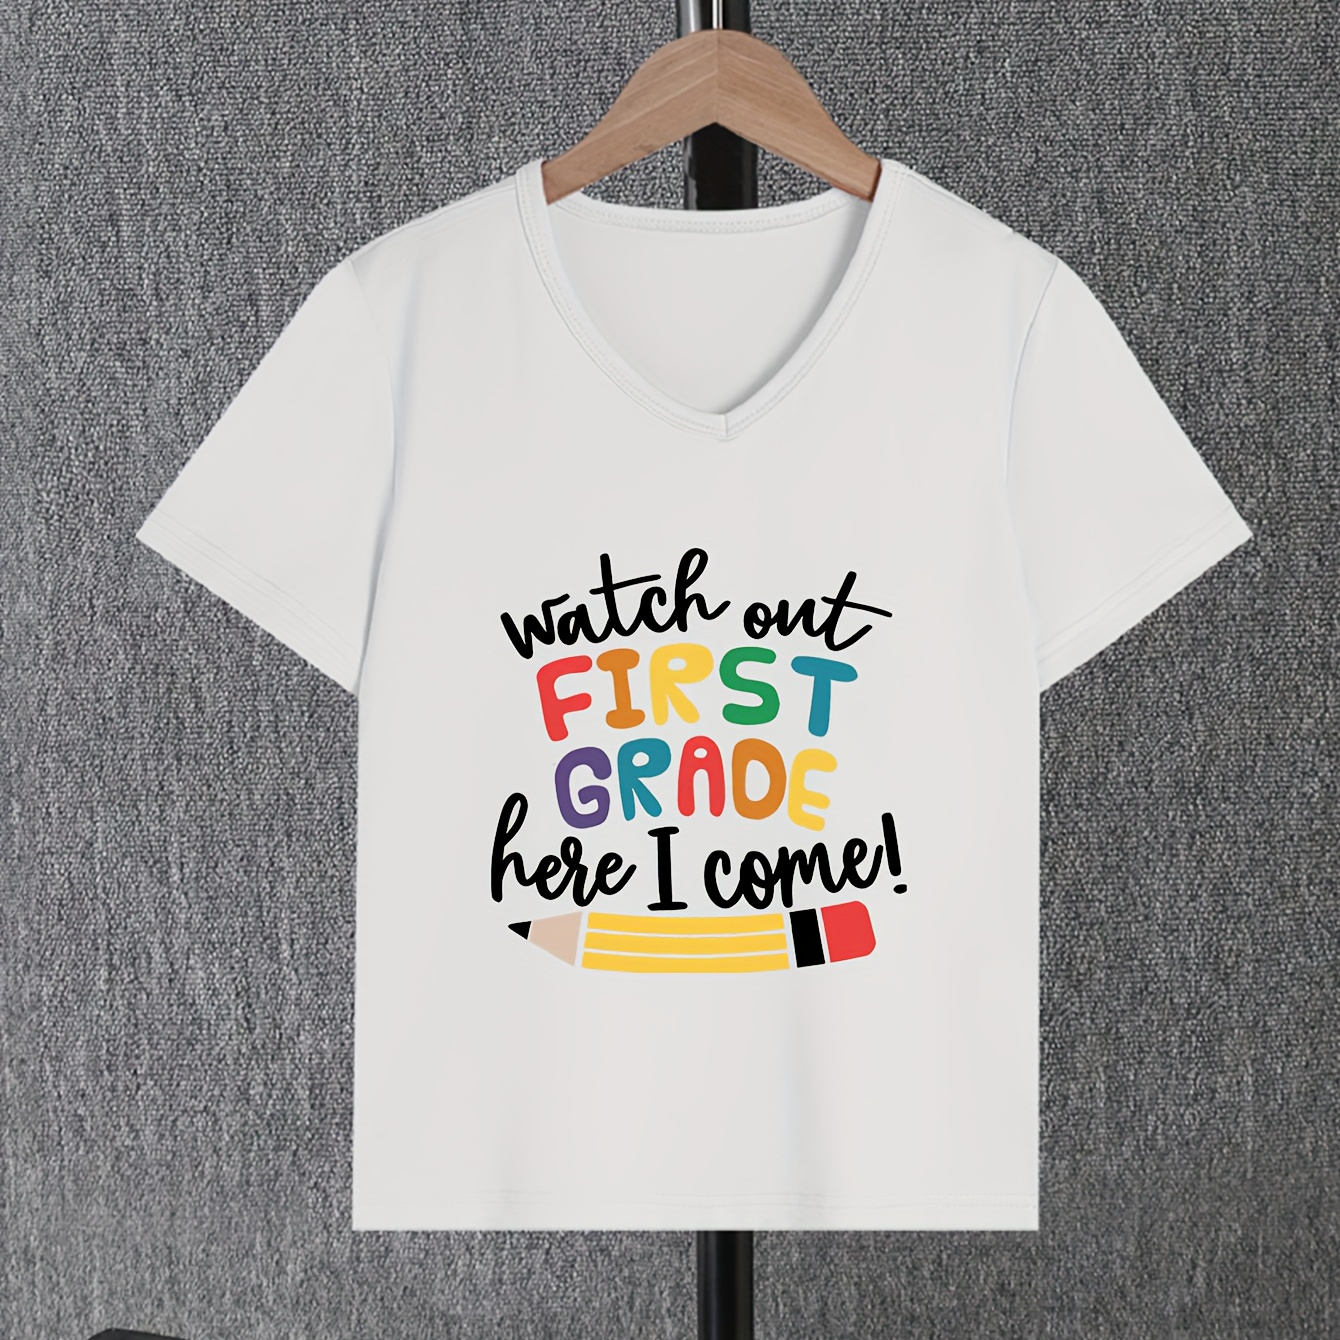 

Watch Out First Grade Here I Come Print Boys Casual T-shirt, Cool Comfy Lightweight Versatile Tee Top, Perfect Summer Clothing